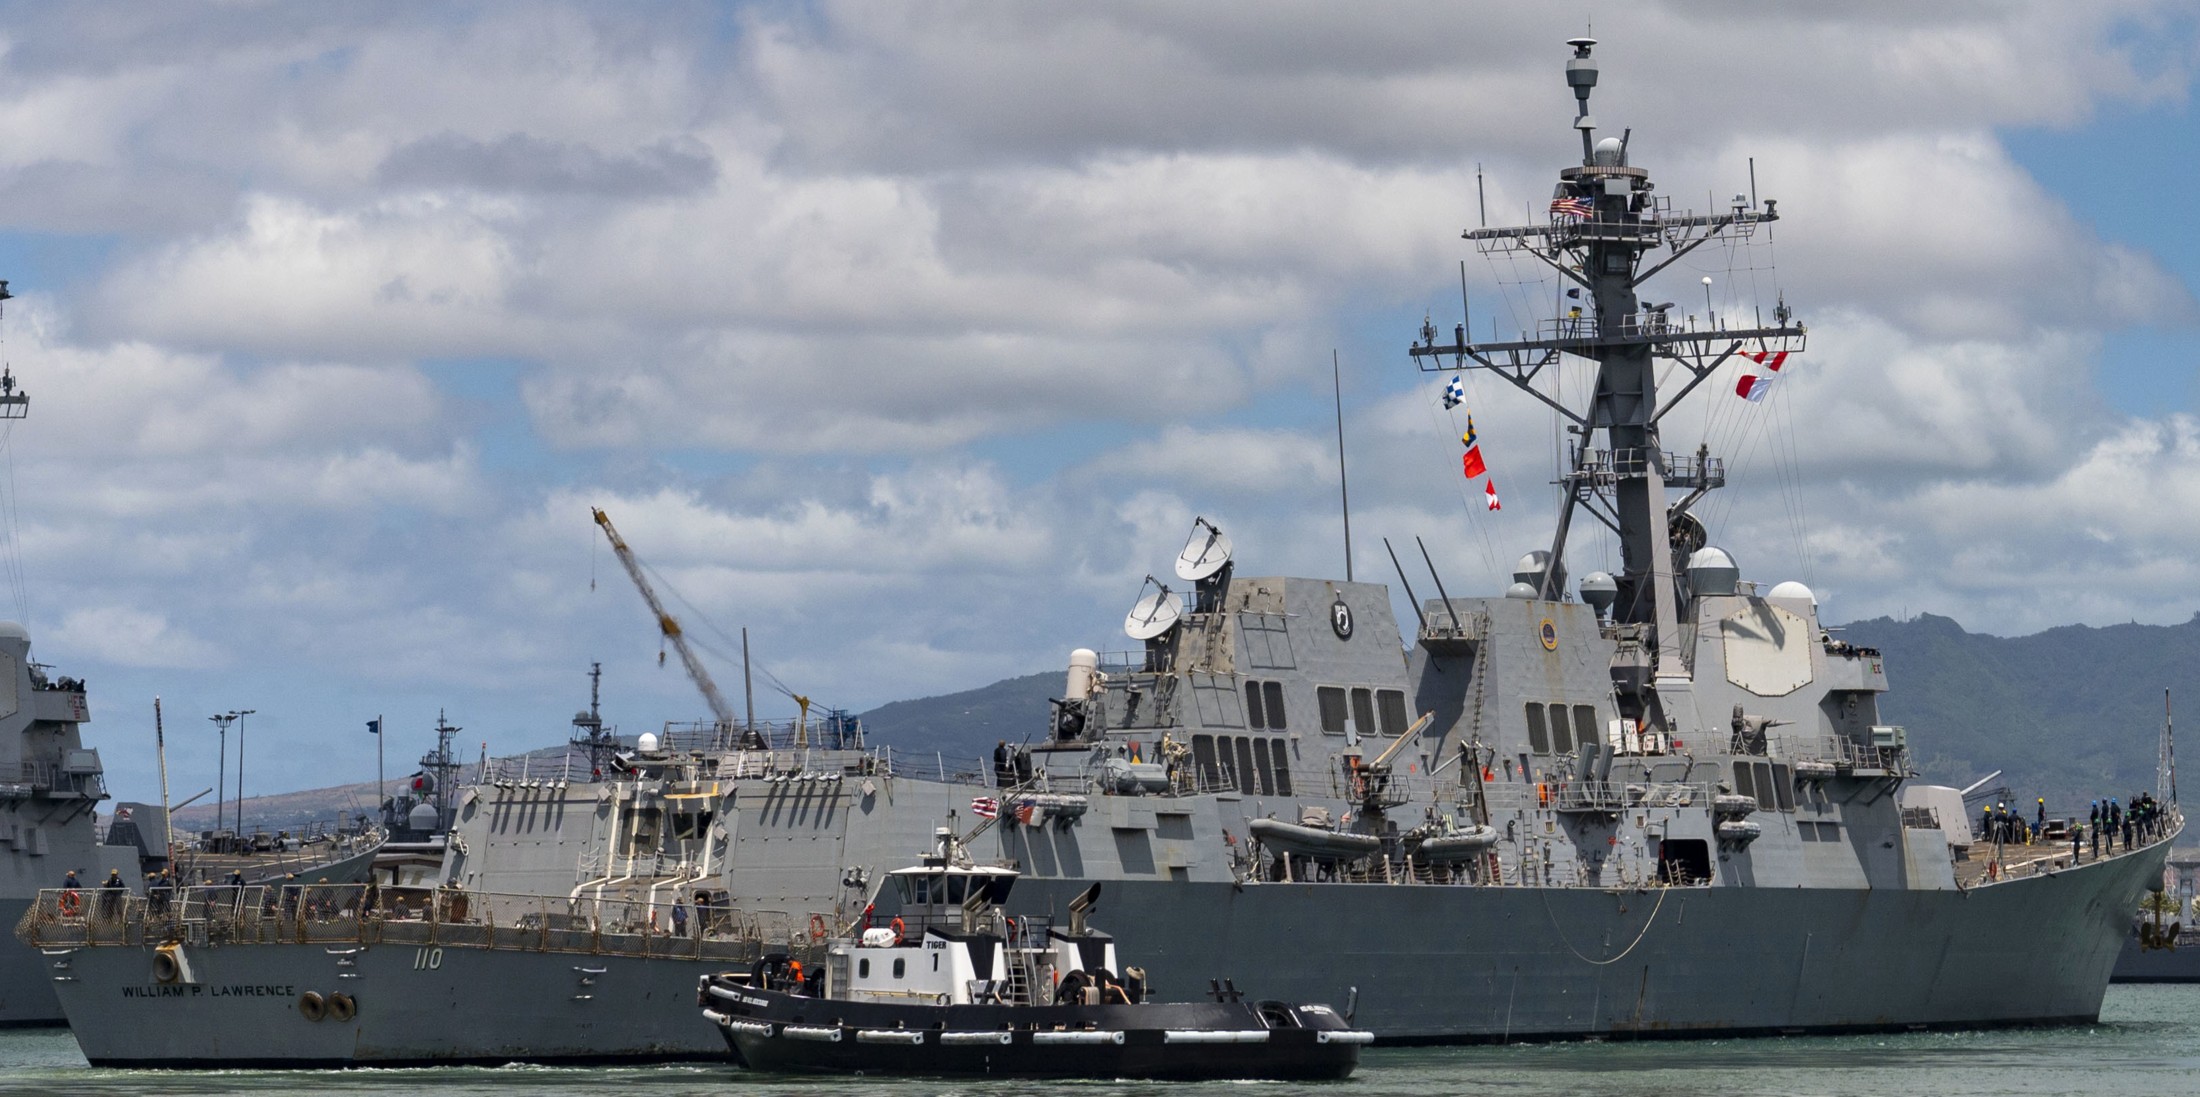 ddg-110 uss william p. lawrence arleigh burke class guided missile destroyer aegis us navy departing pearl harbor hickam 60